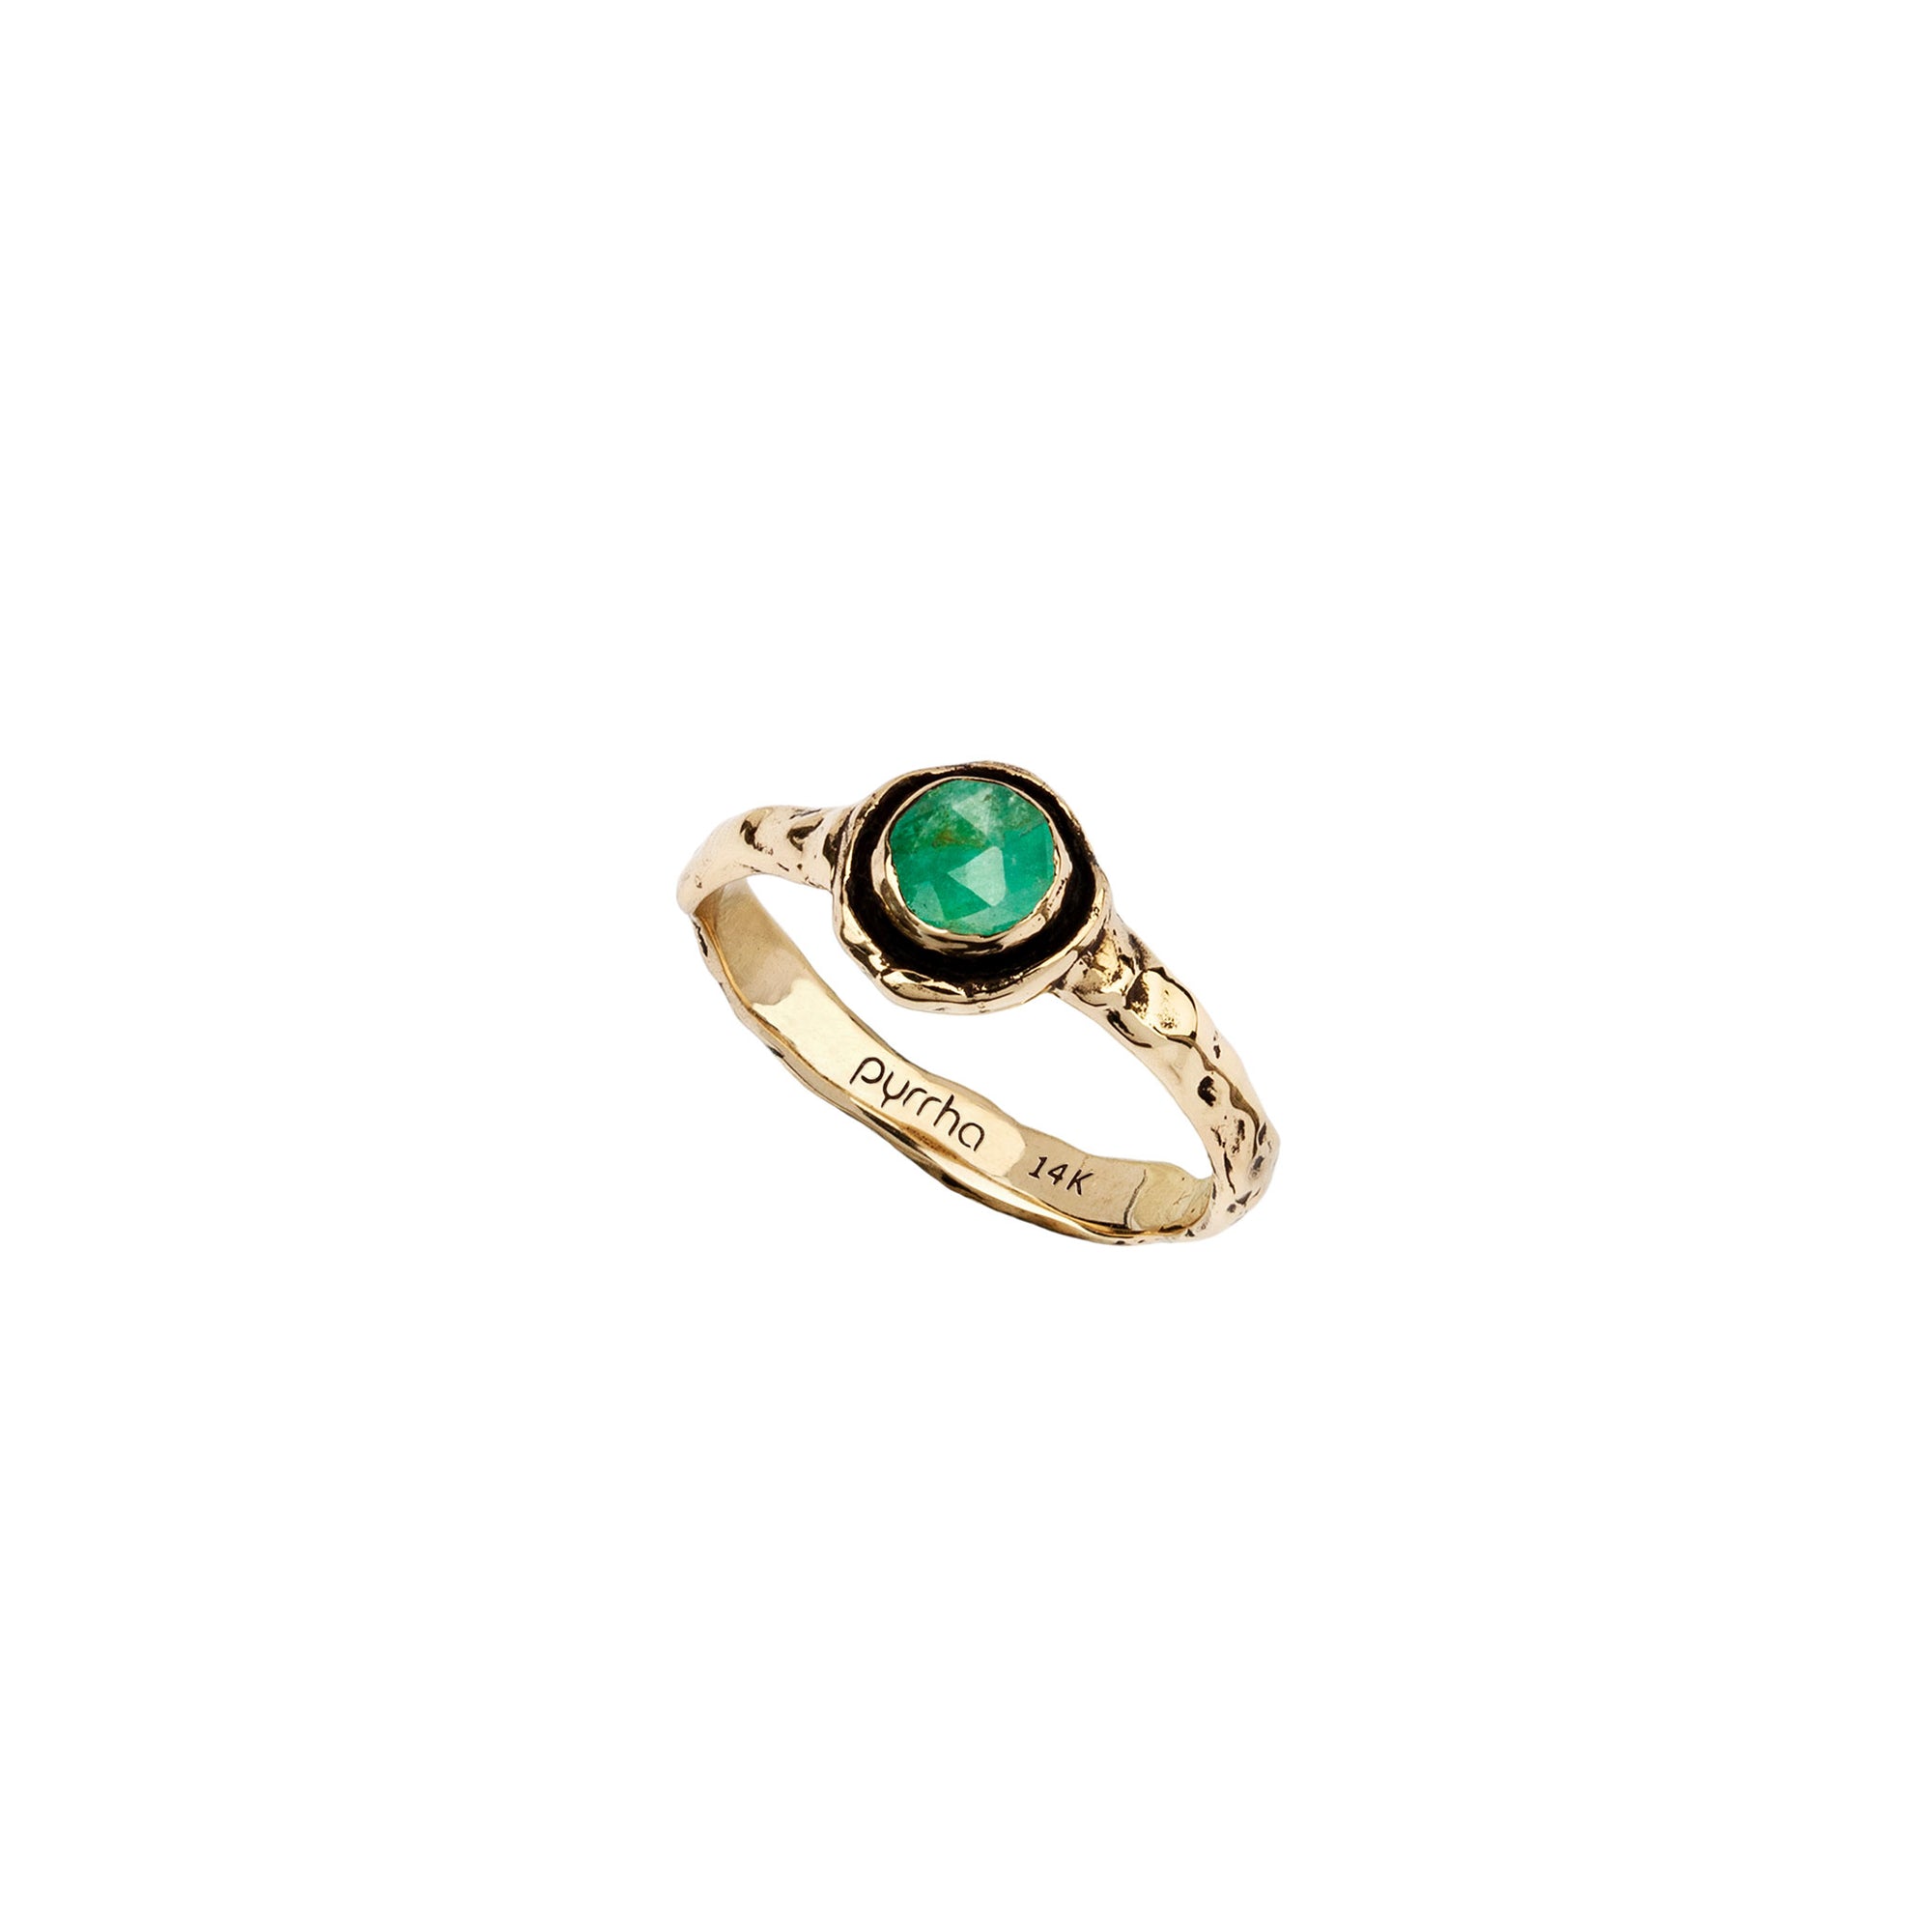 A narrow 14k gold ring set with an emerald.